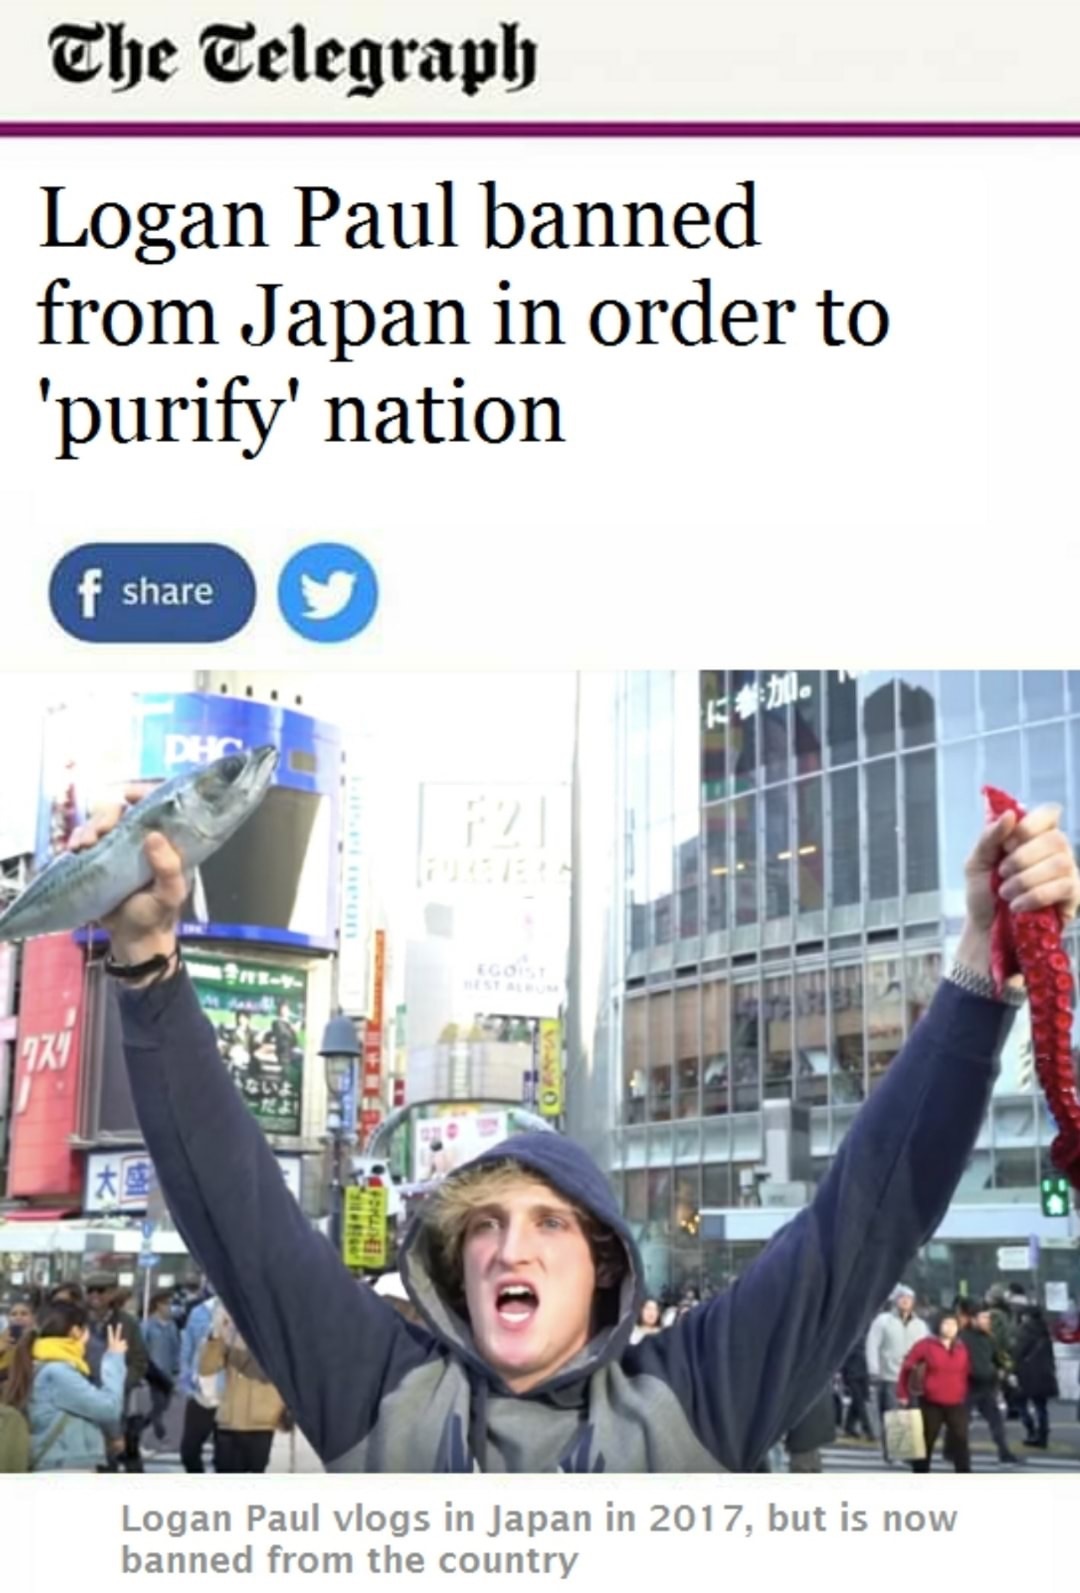 ban logan paul - The Telegraph Logan Paul banned from Japan in order to 'purify' nation f Logan Paul vlogs in Japan in 2017, but is now banned from the country